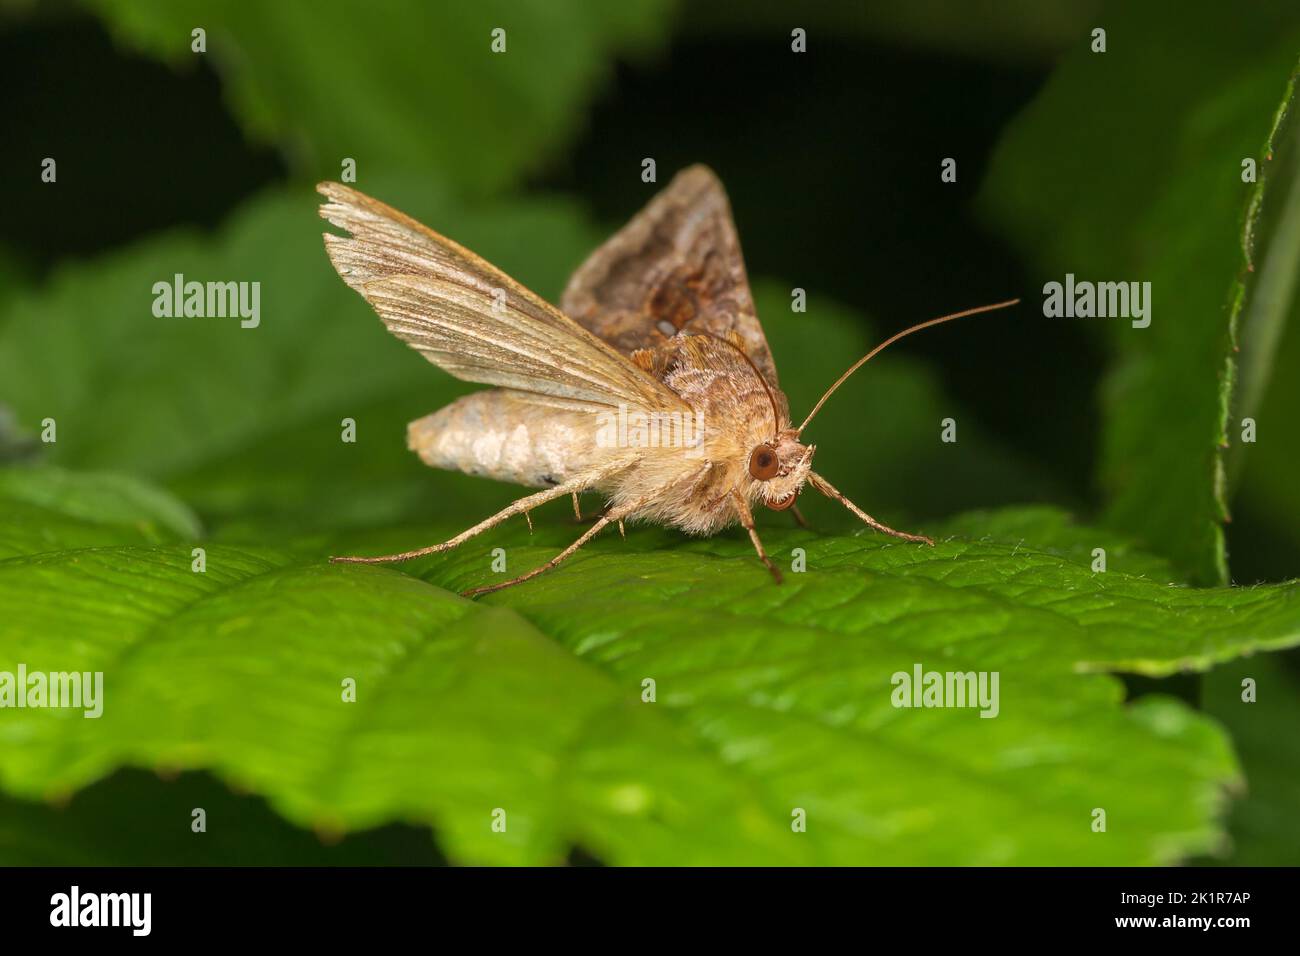 Moth with spread wings on a green leaf. Macro photography. Stock Photo